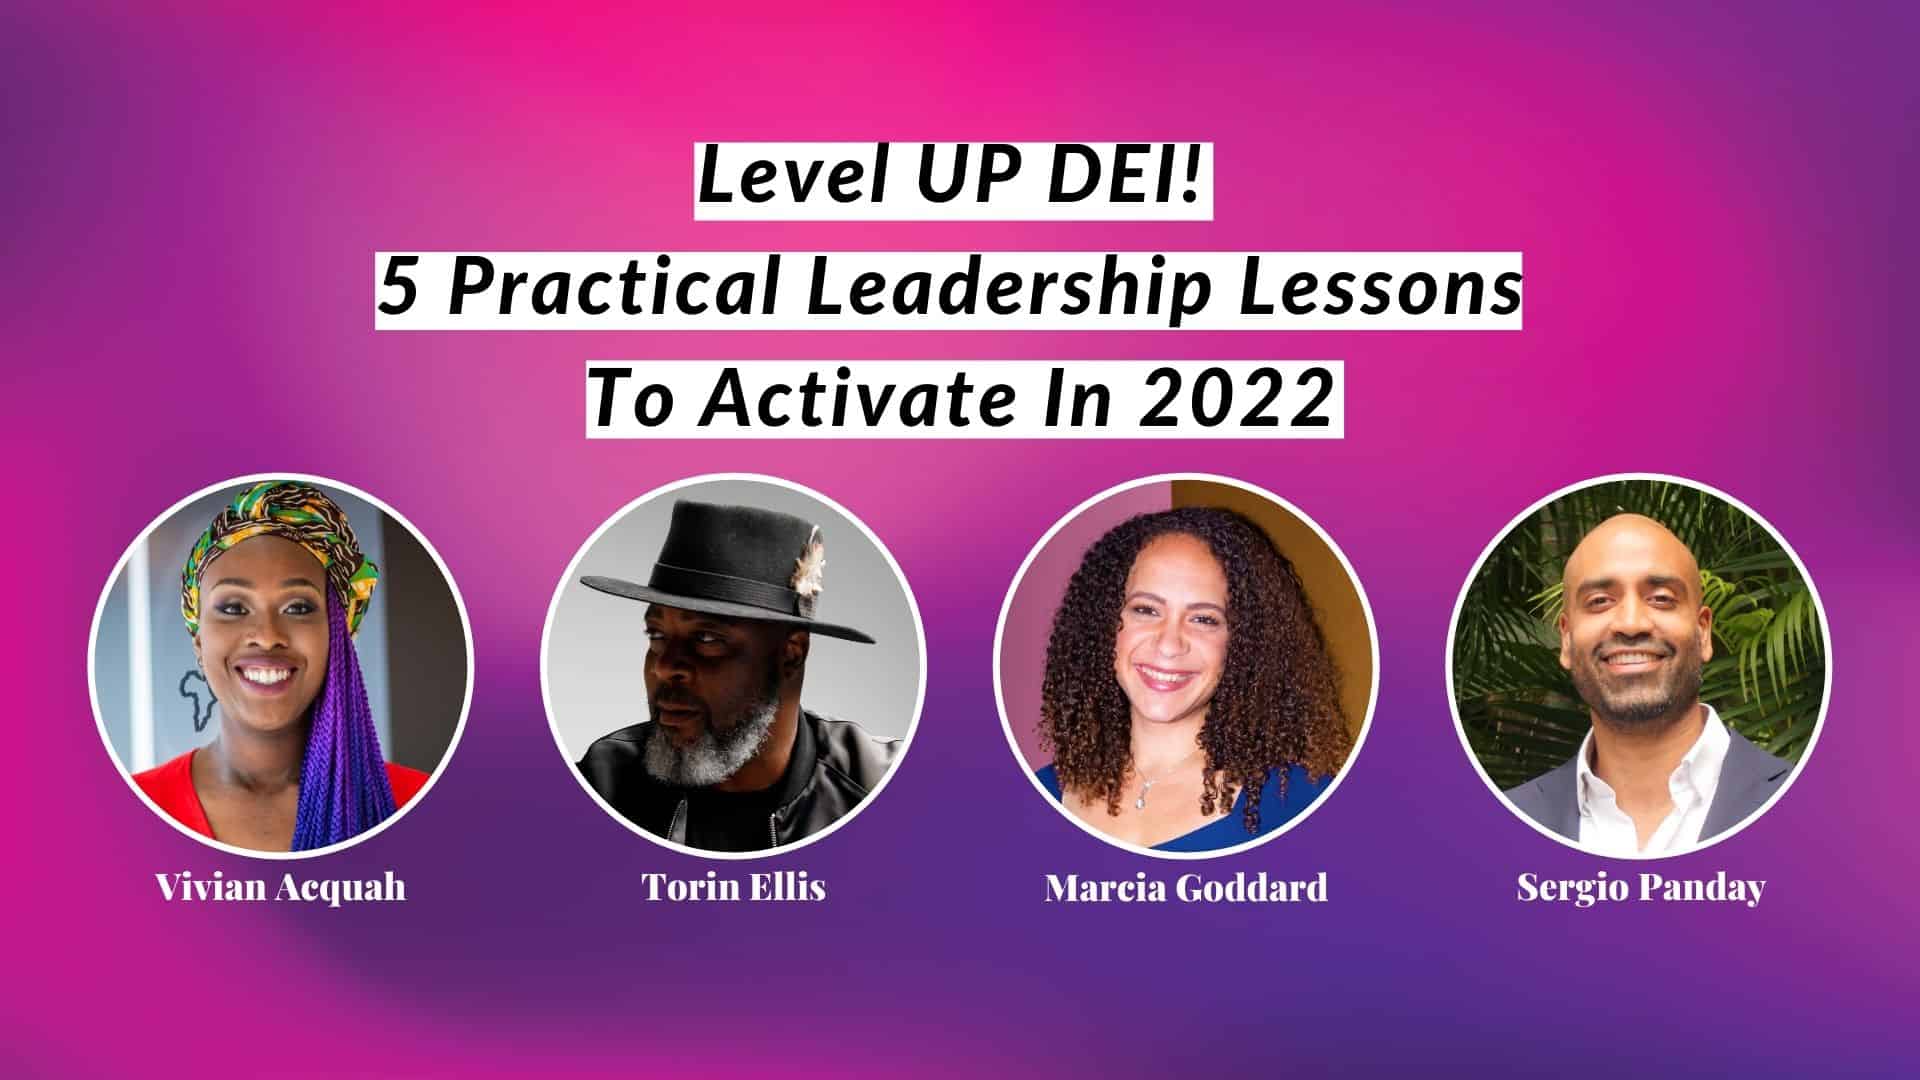 Level Up DEI 5 Practical Leadership Lessons To Activate In 2022 Sergio Panday Marcia Goddard Torin Ellis Vivian Acquah